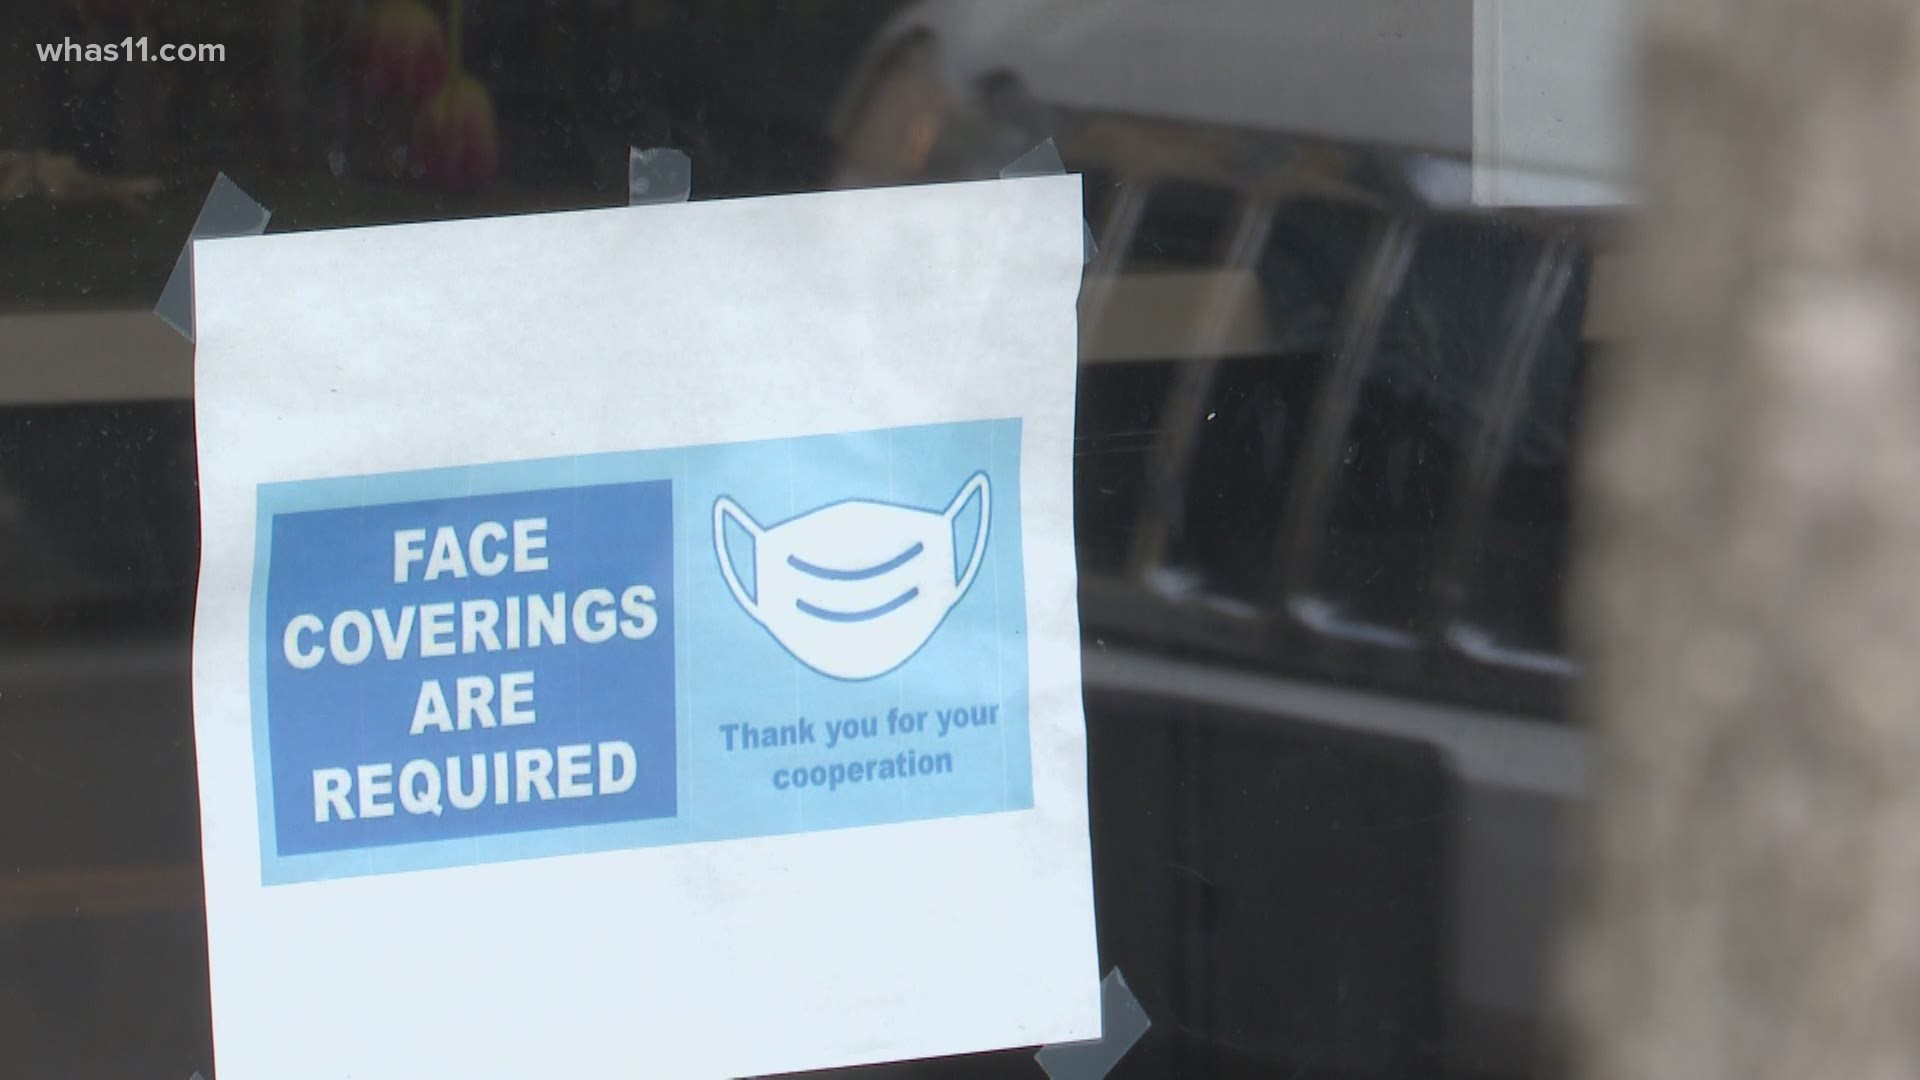 Businesses keeping the mask requirements could lose customers. Some Hoosiers say will no longer frequent places that require one.